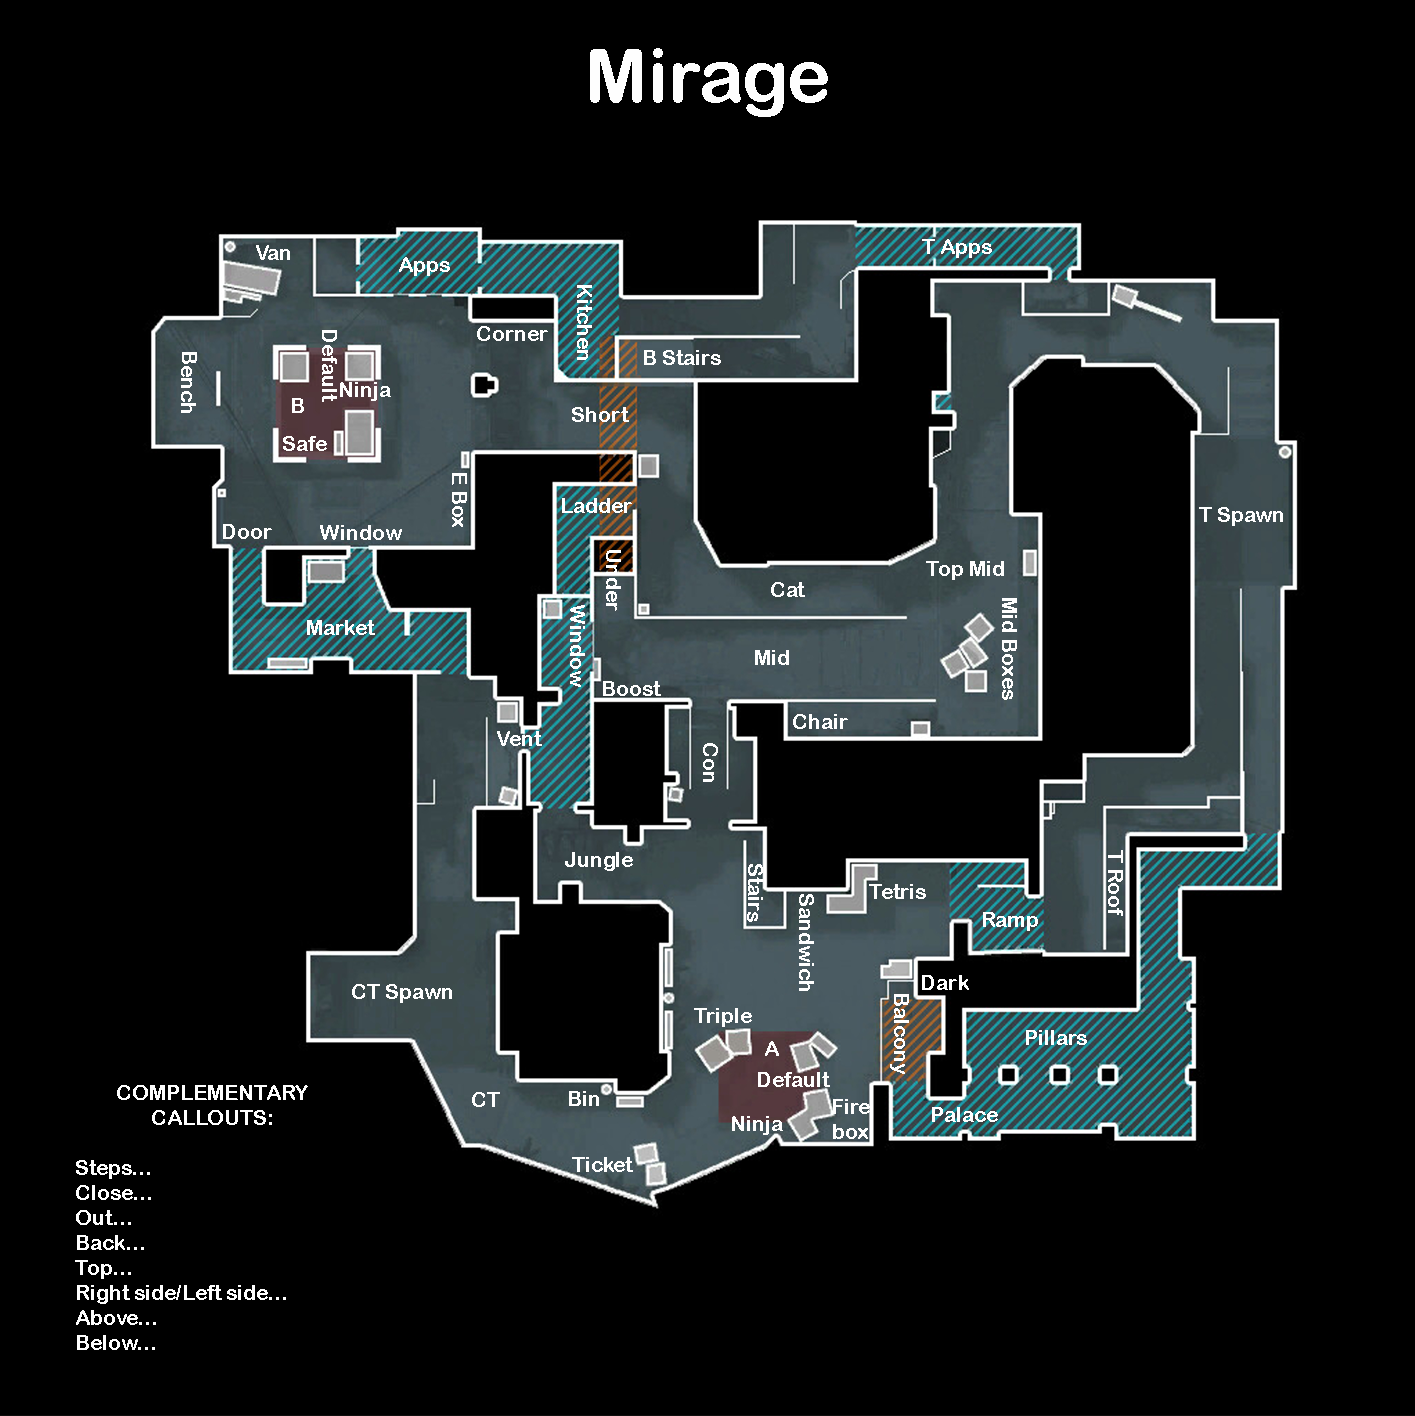 Mirage Callouts for CS:GO